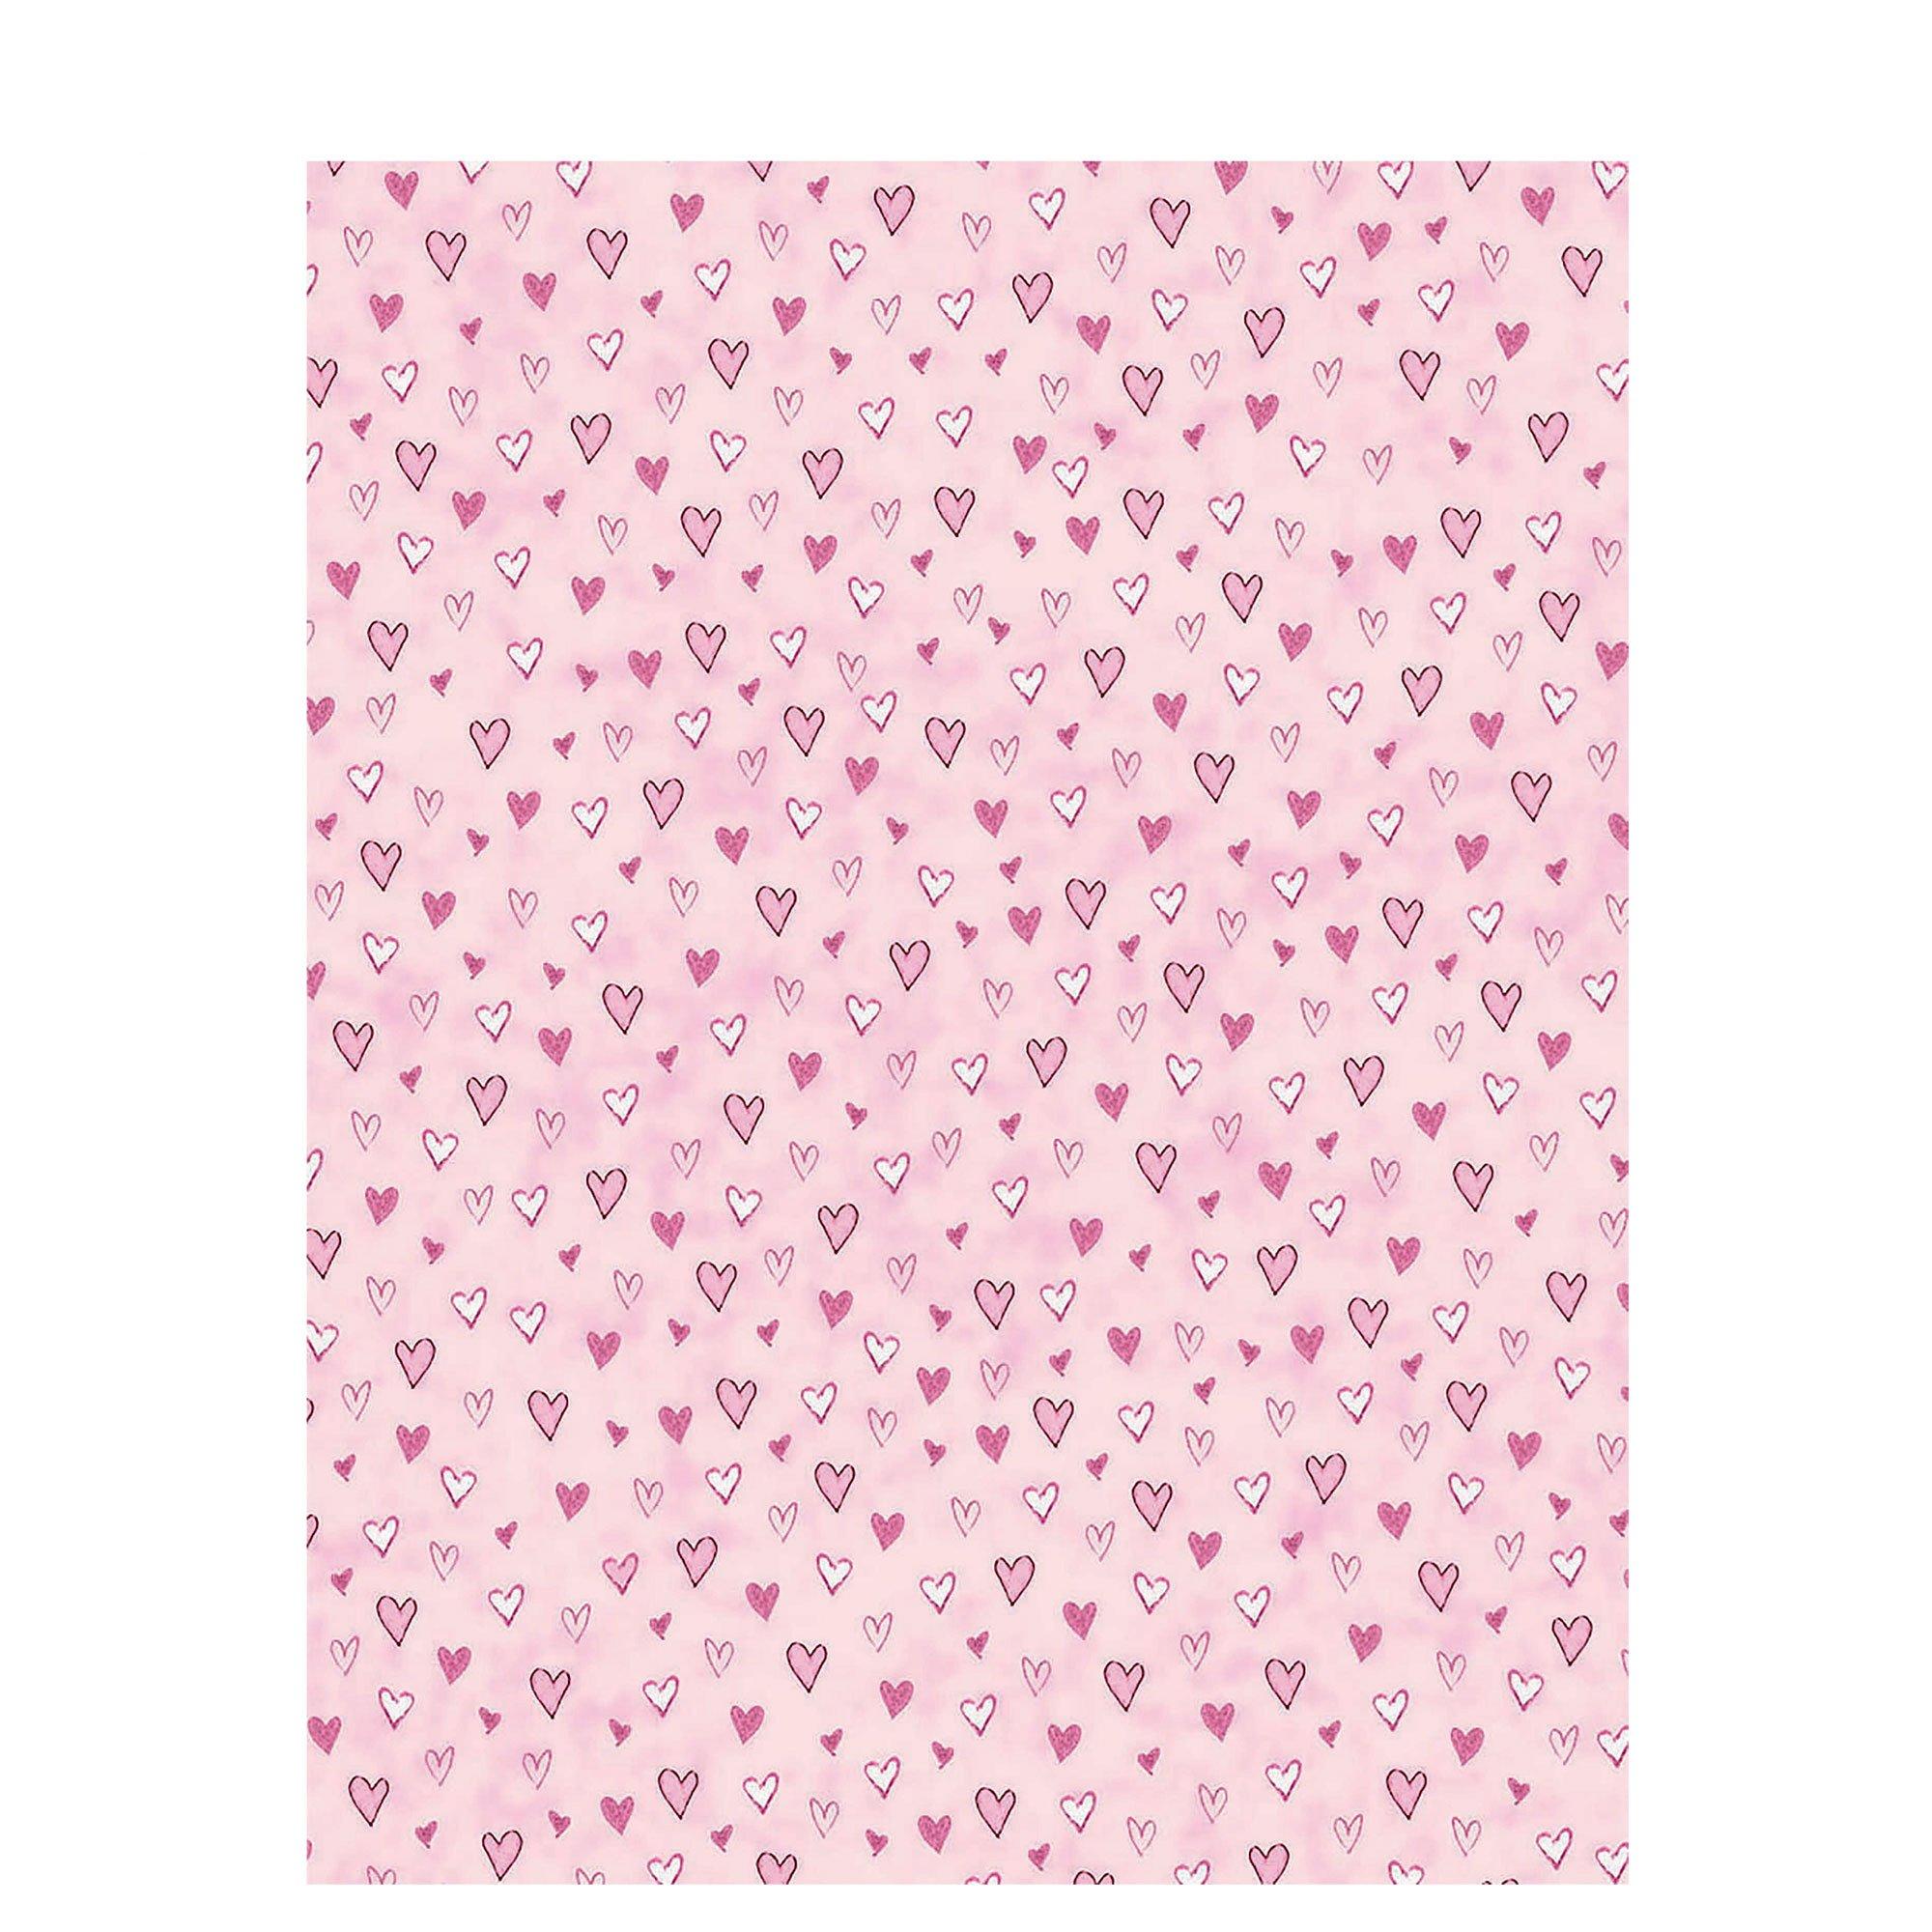 8.5 X 11 Rose Pink Speckled Scrapbooking Letterhead Craft Paper 25 Sheets  70#